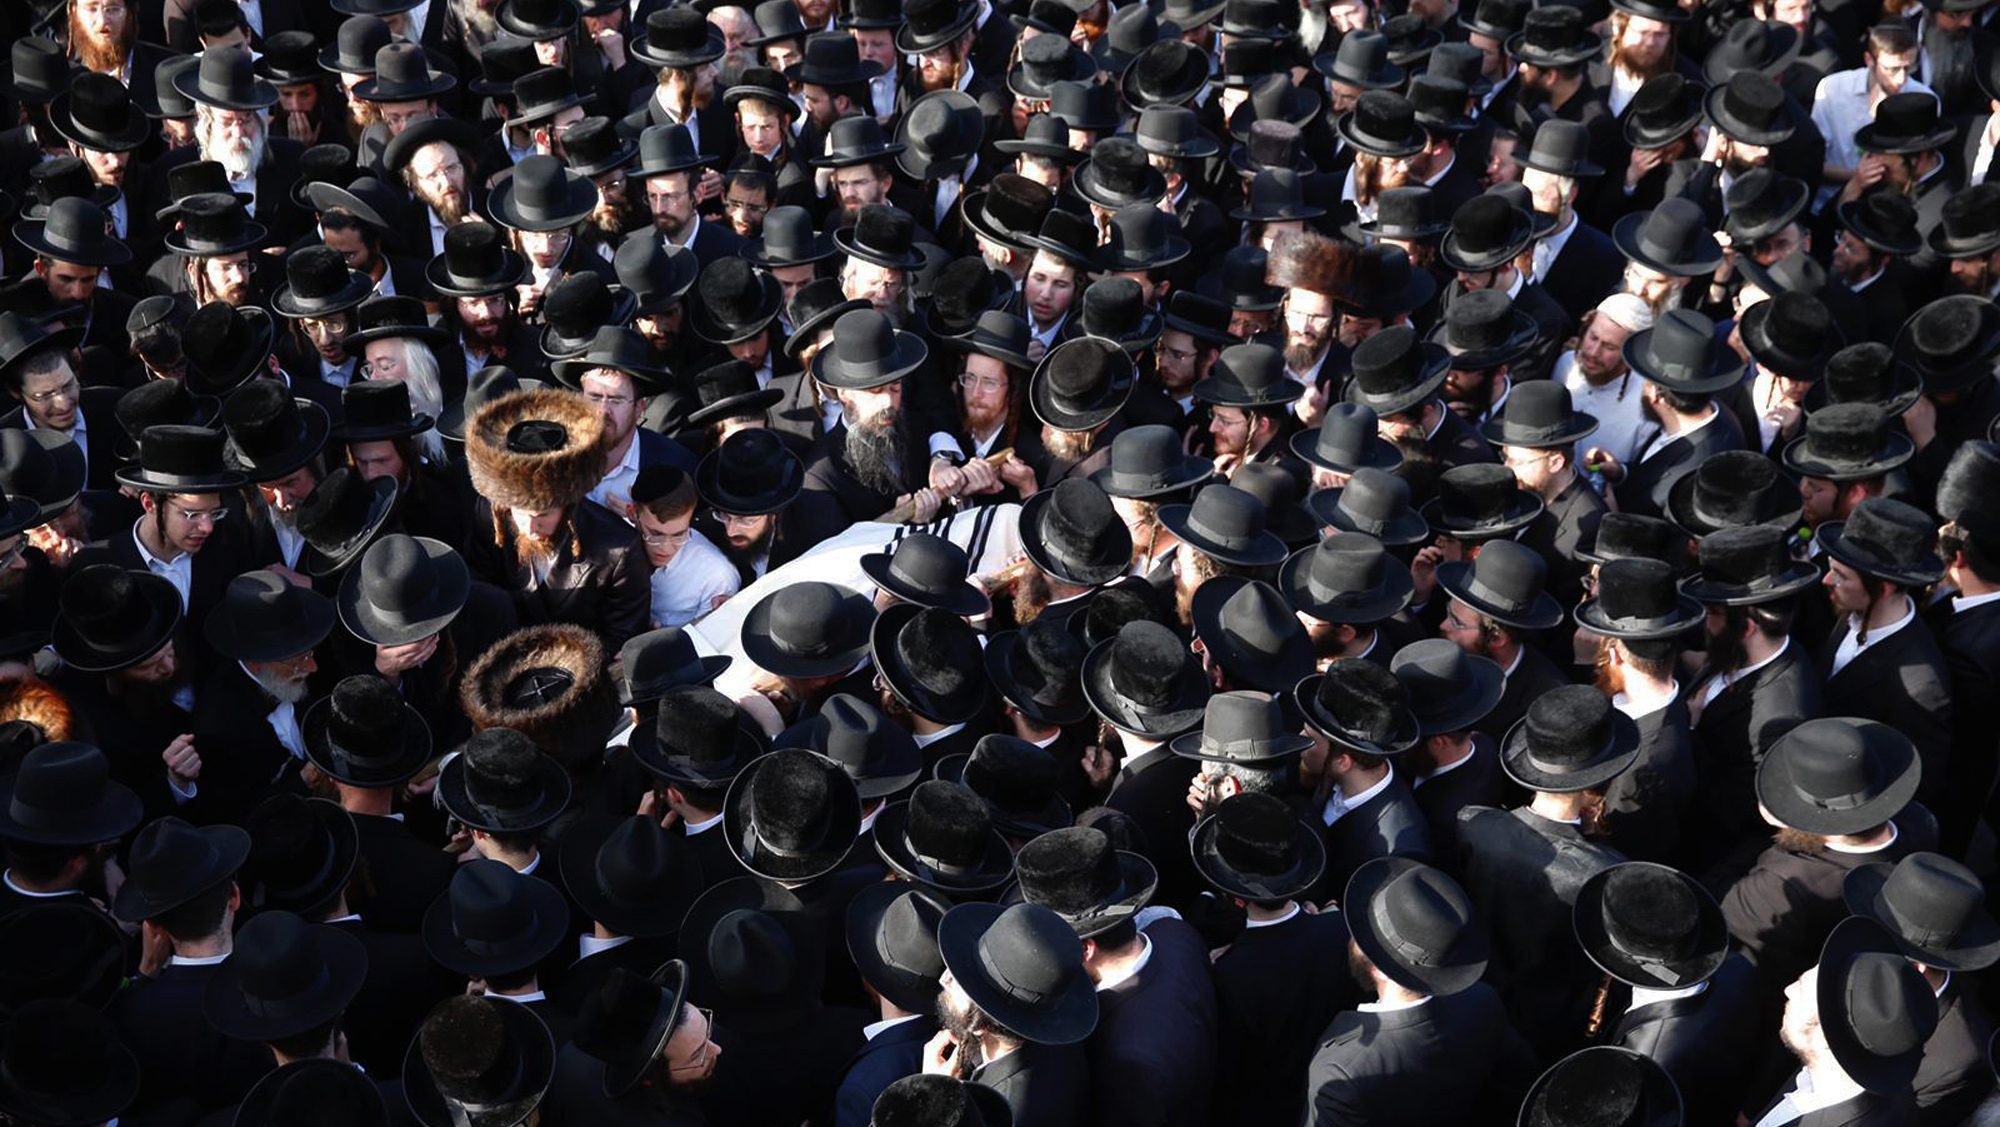 Mourners carry the body of Shragee Gestetner, a Canadian singer who died during Lag BaOmer celebrations at Mt. Meron in northern Israel, at his funeral in Jerusalem, April 30, 2021. A stampede at a religious festival attended by tens of thousands of ultra-Orthodox Jews in northern Israel killed dozens of people and injured about 150 others early Friday, medical officials said. It was one of the country's deadliest civilian disasters.